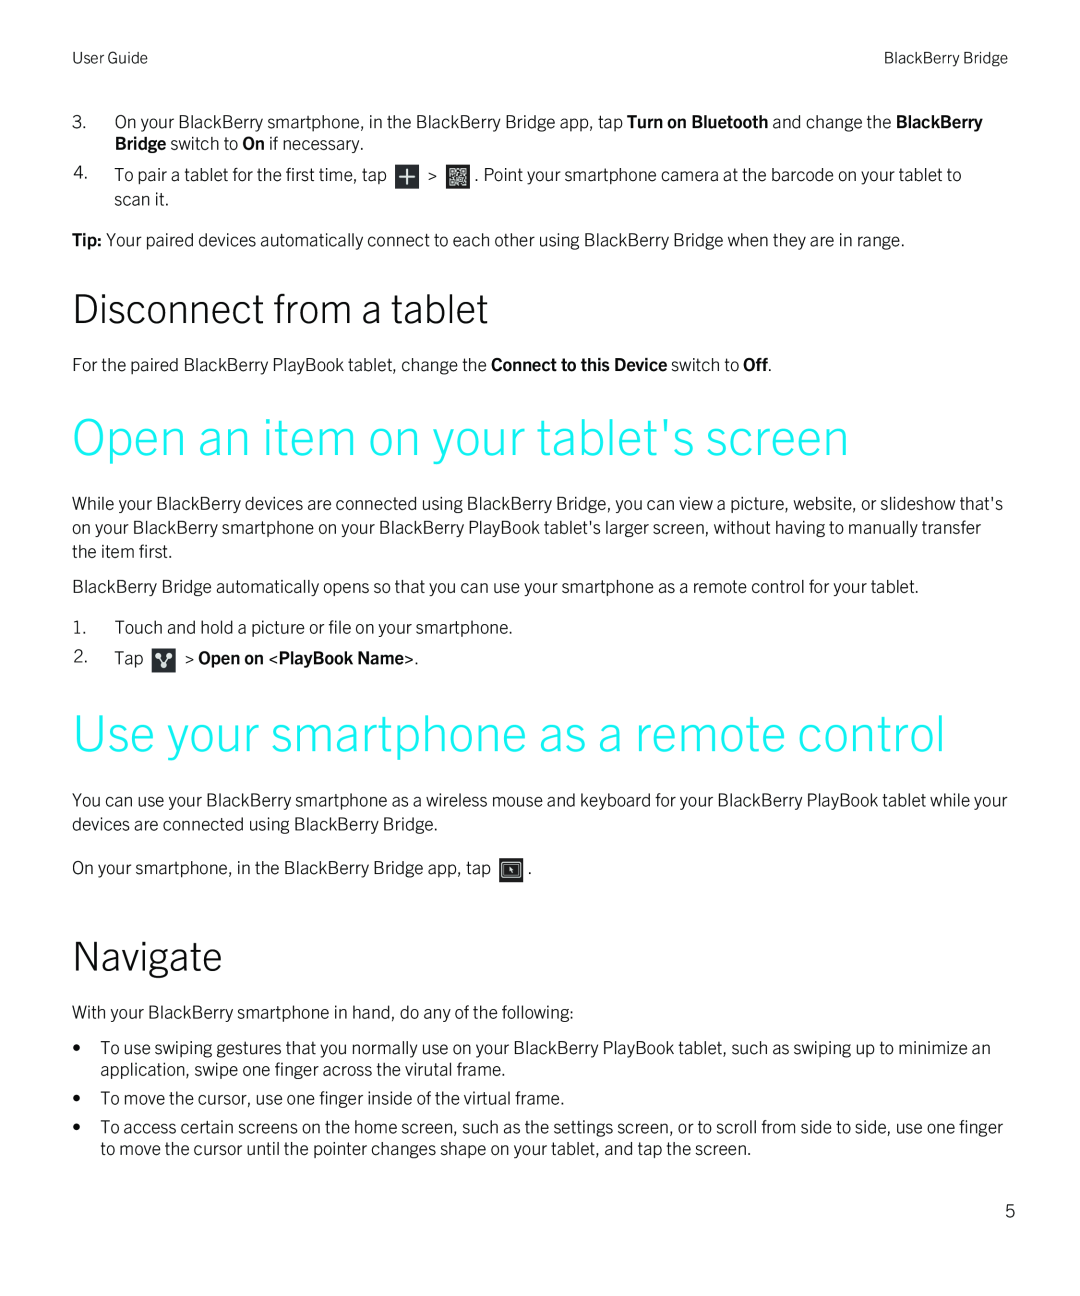 Blackberry 3.3 Open an item on your tablets screen, Use your smartphone as a remote control, Disconnect from a tablet 